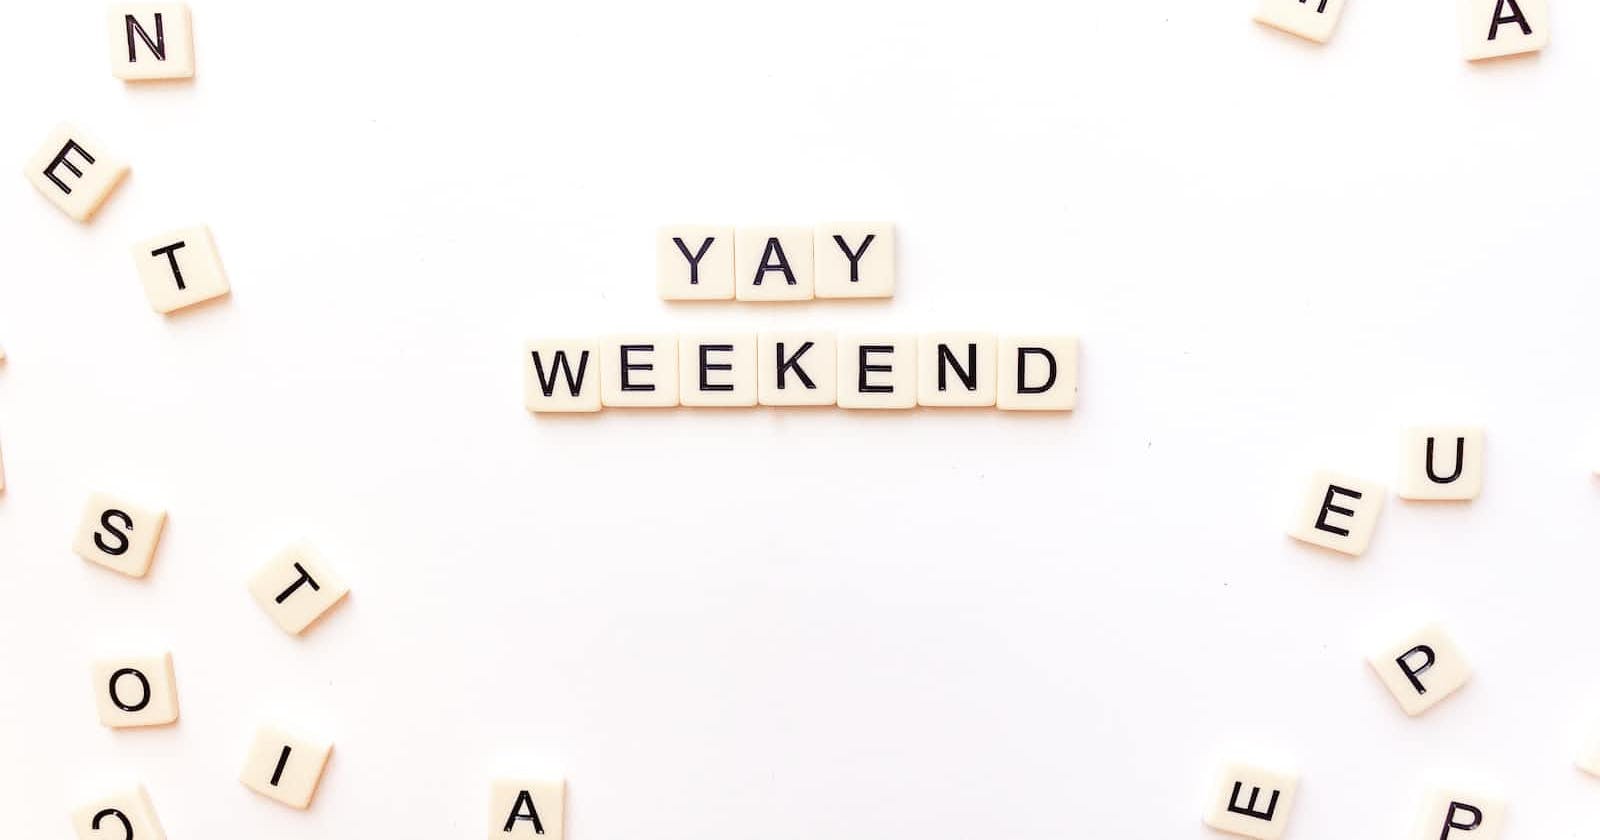 It's Time for The Weekend!